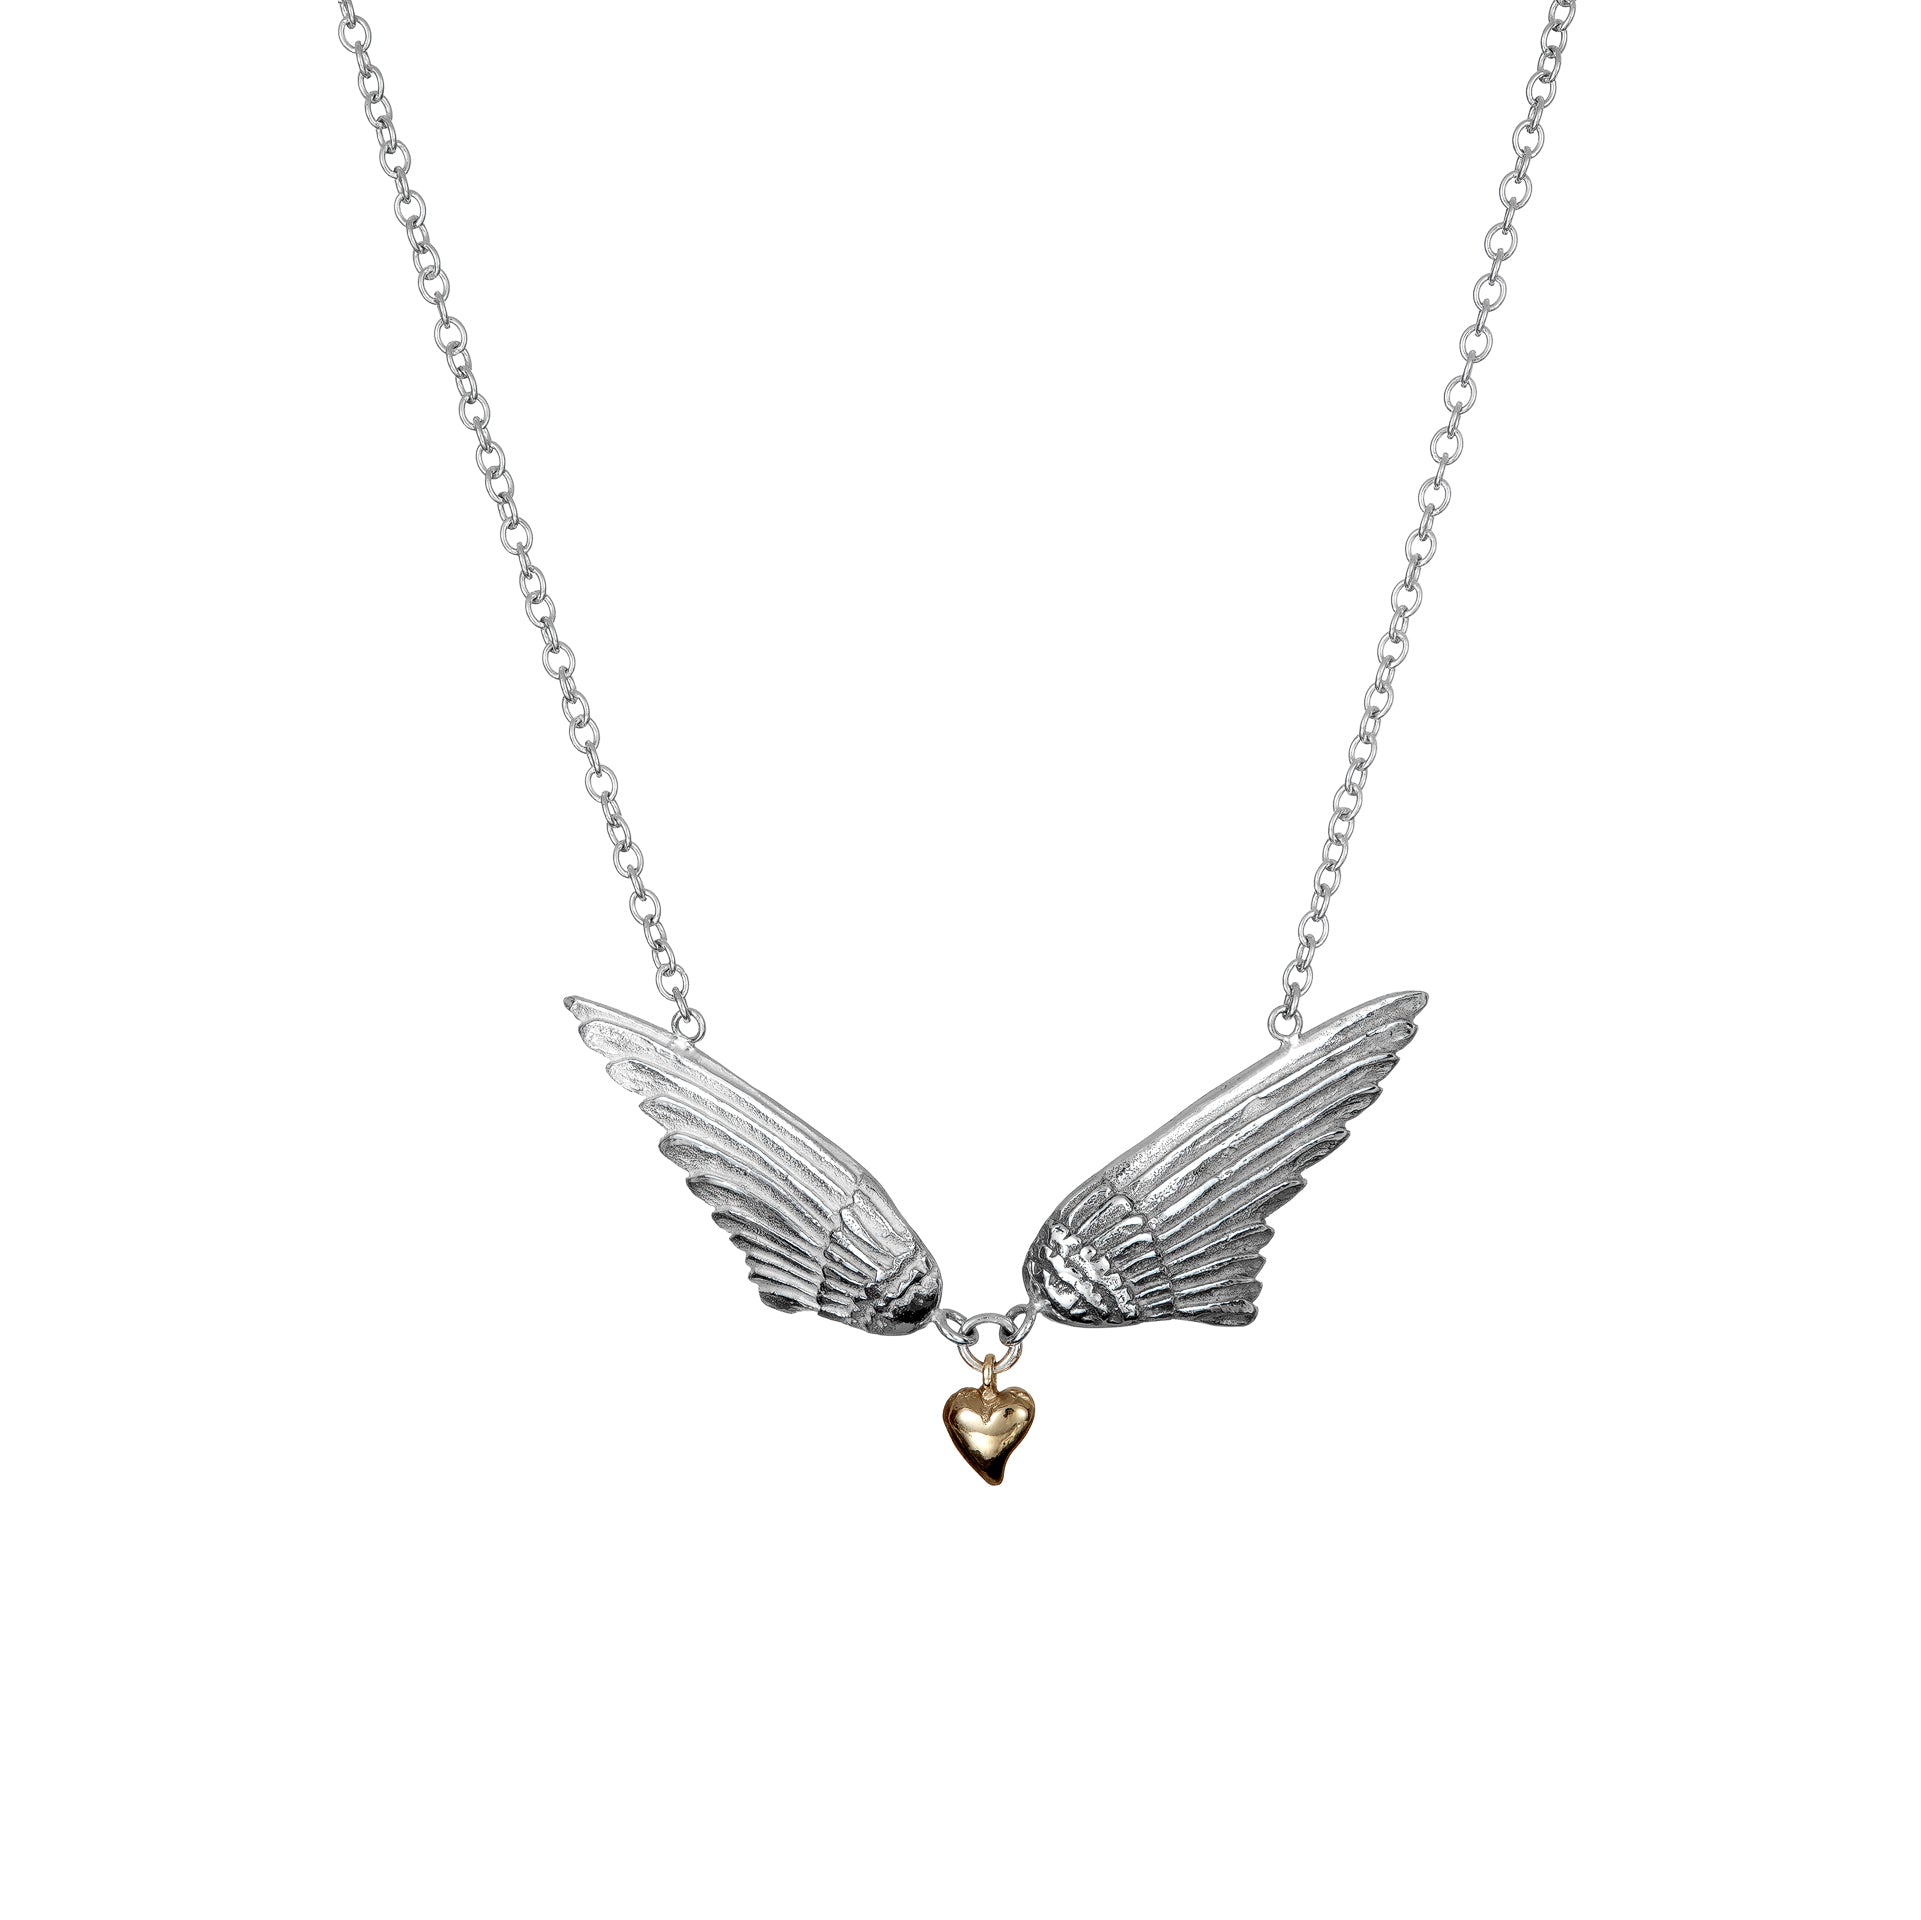 Love of the Angels Pendant